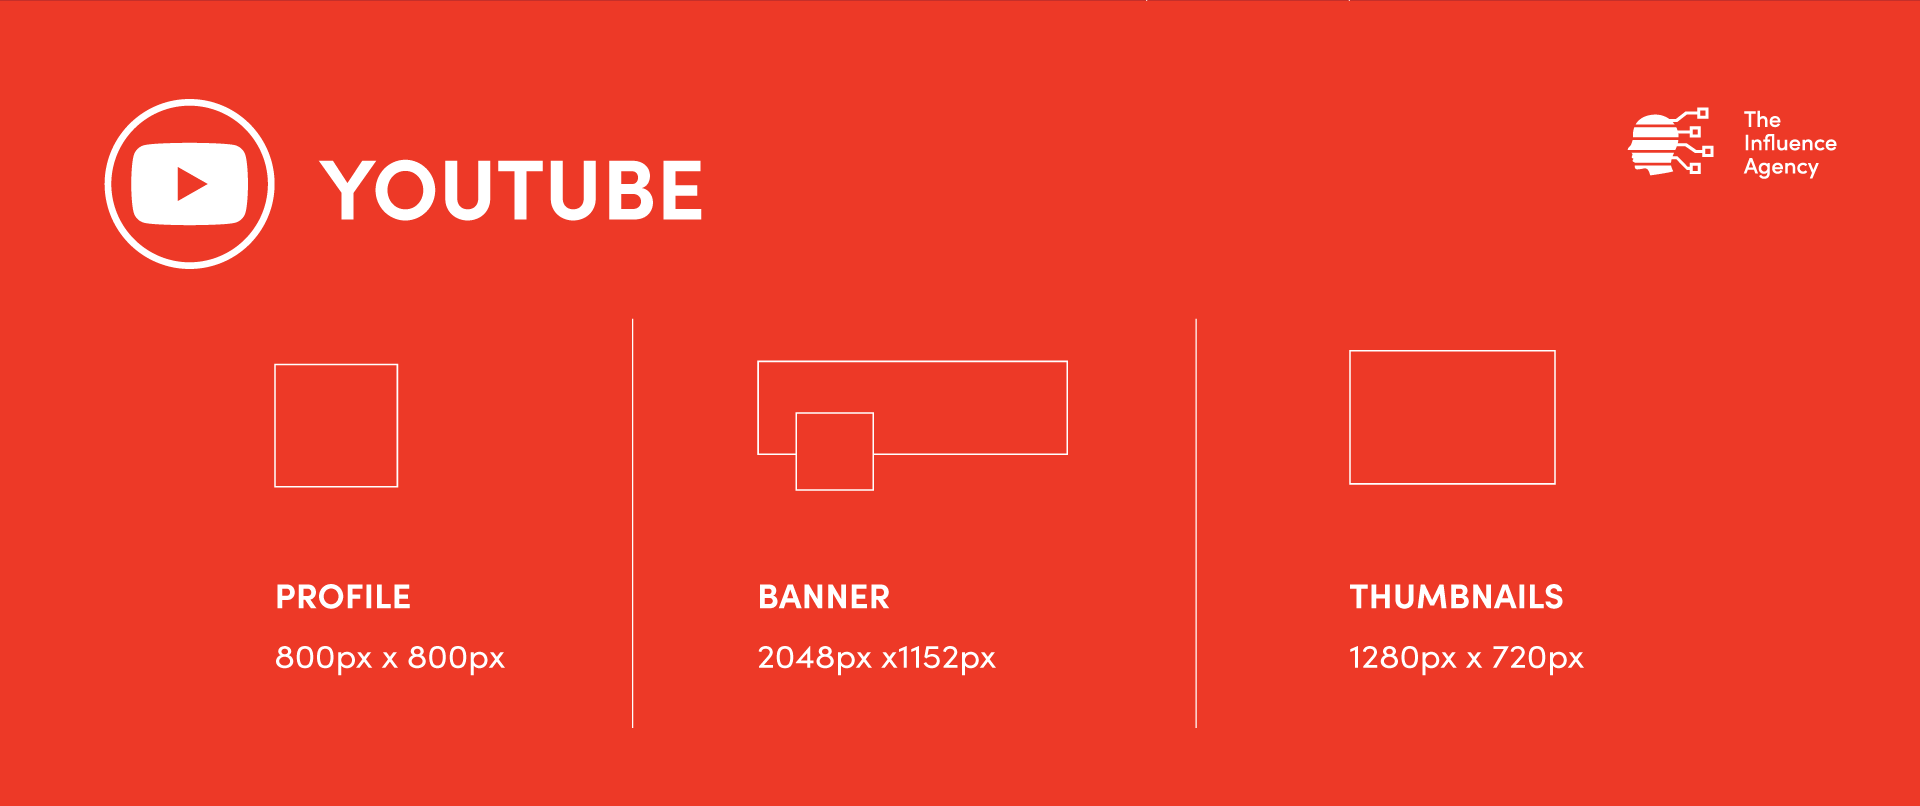 Diagrams of Youtube image dimensions.